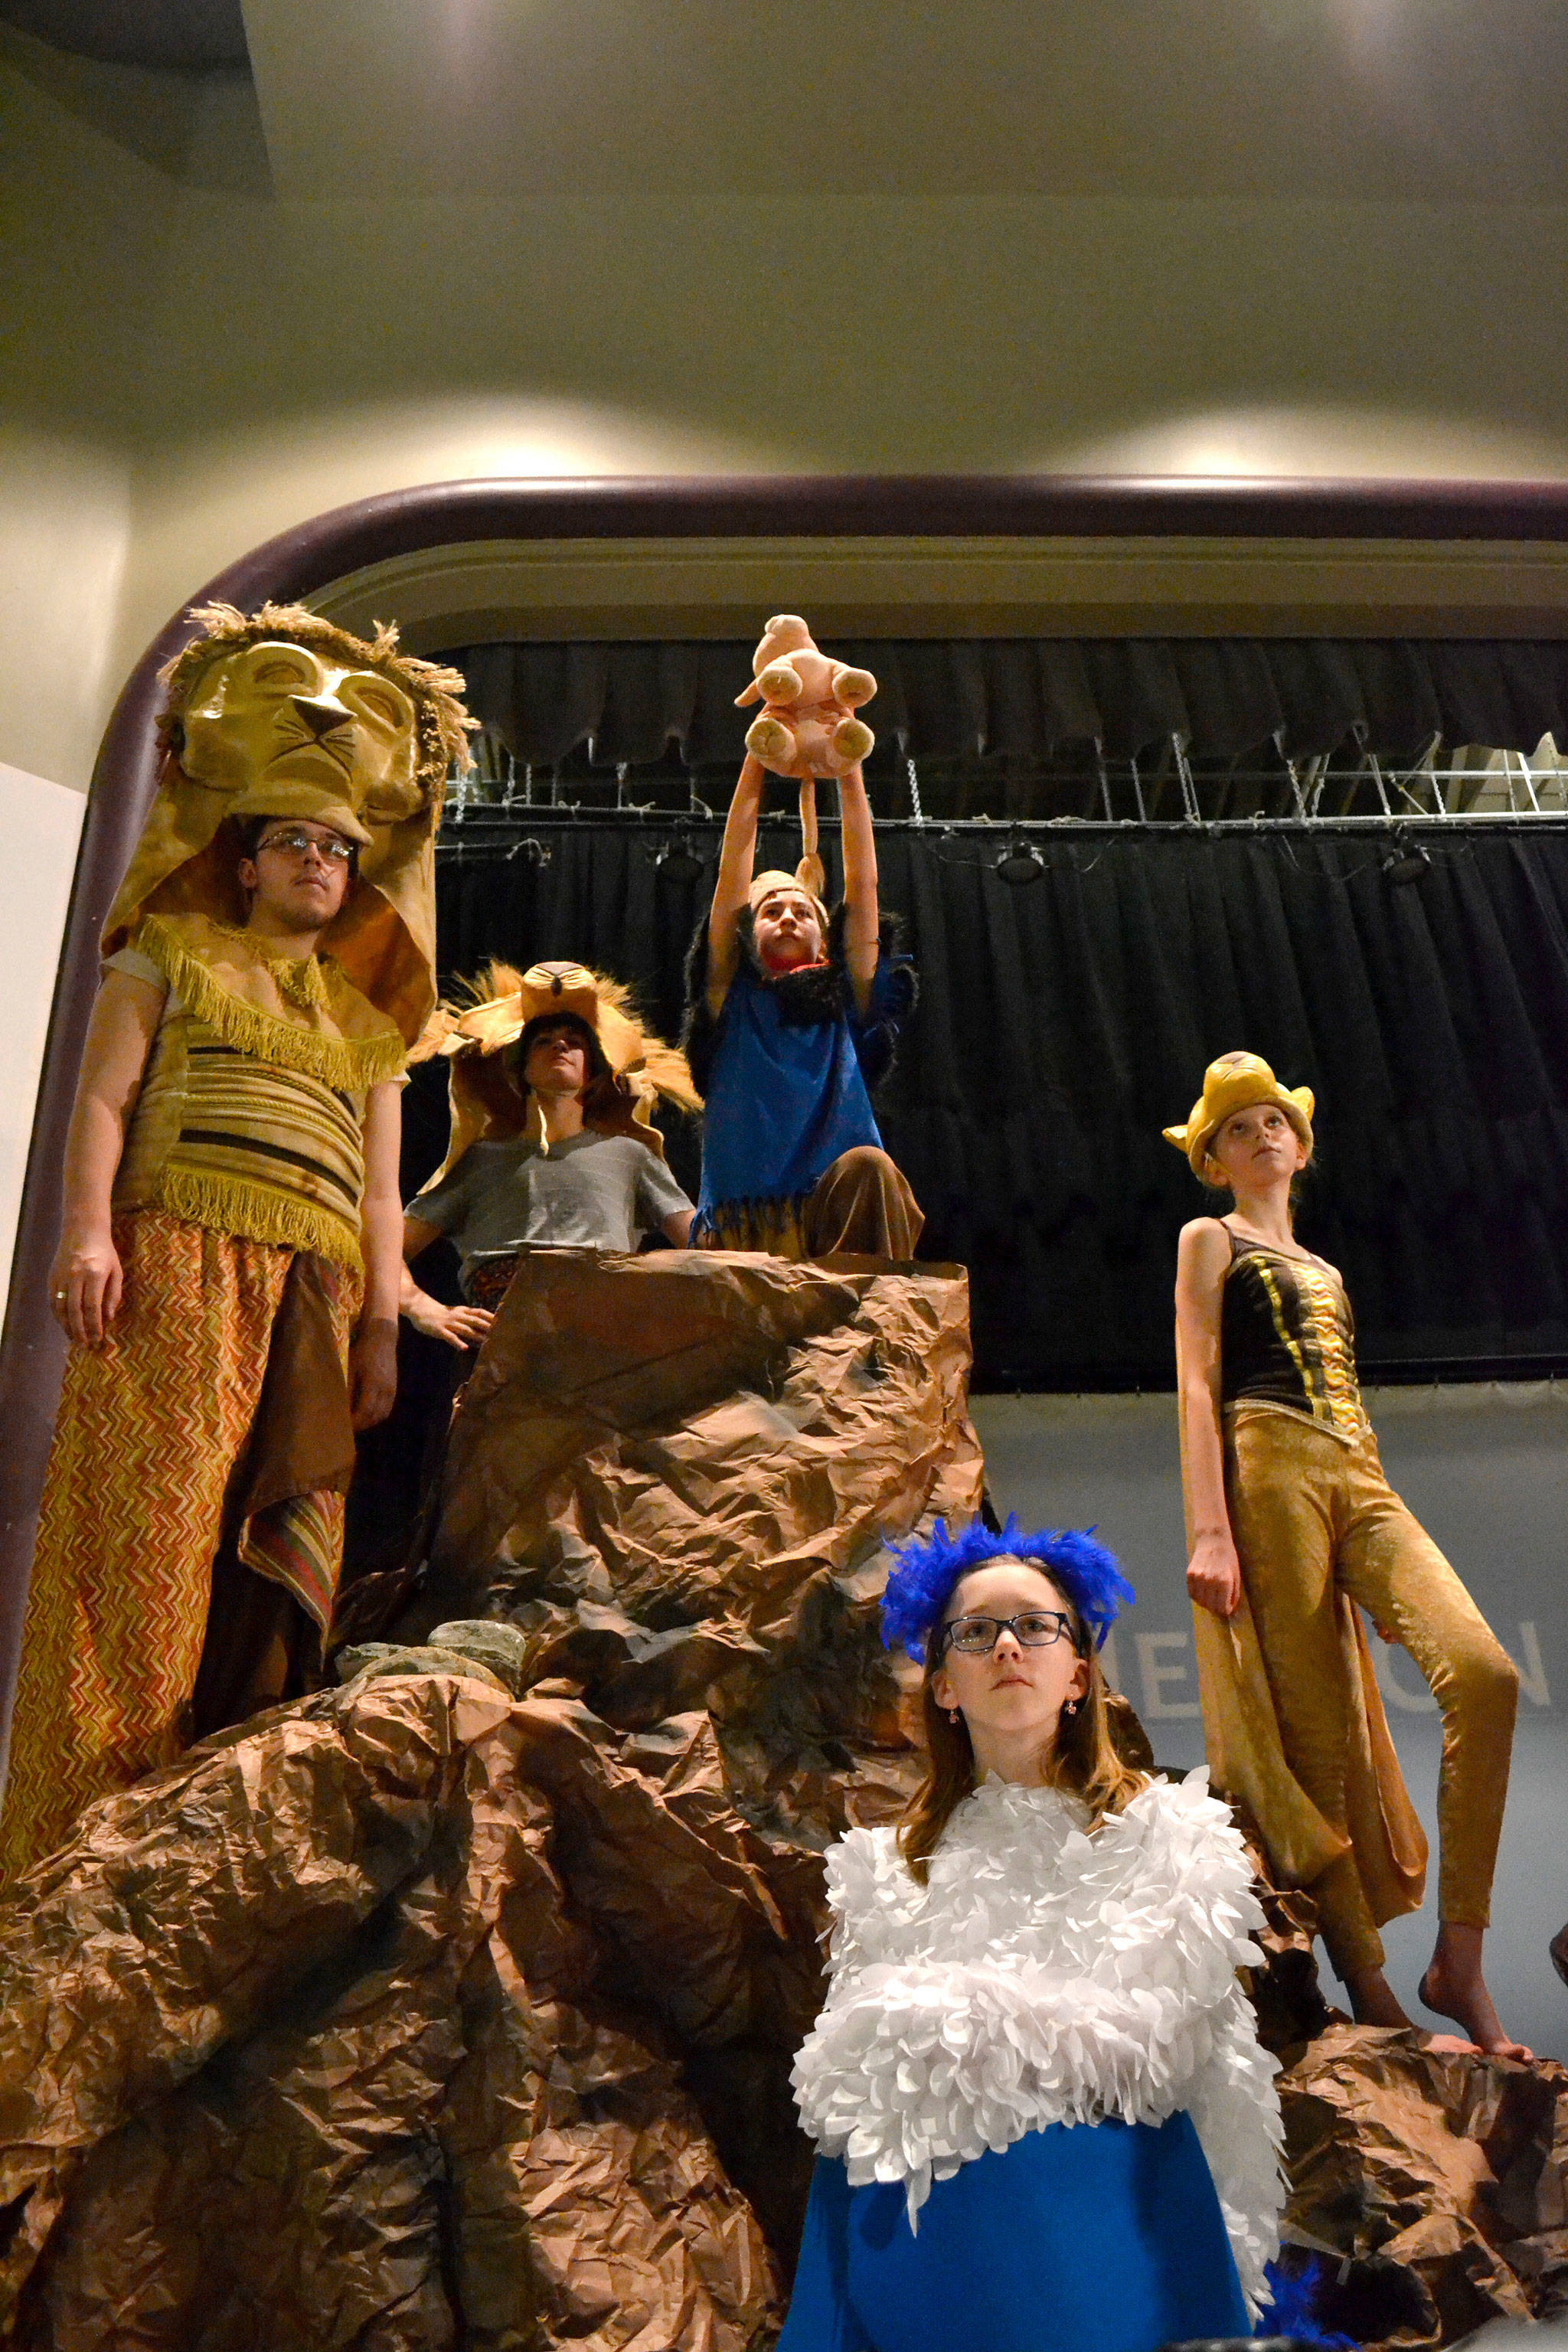 Sequim Middle School presents “The Lion King Jr.” today and Friday in the Sequim High School auditorium. Some of its stars include, from left, Damien Cundiff, Henry Hughes, Kariya Johnson, Julia Jeffers, and Kendall Hastings. (Matthew Nash/Olympic Peninsula News Group)